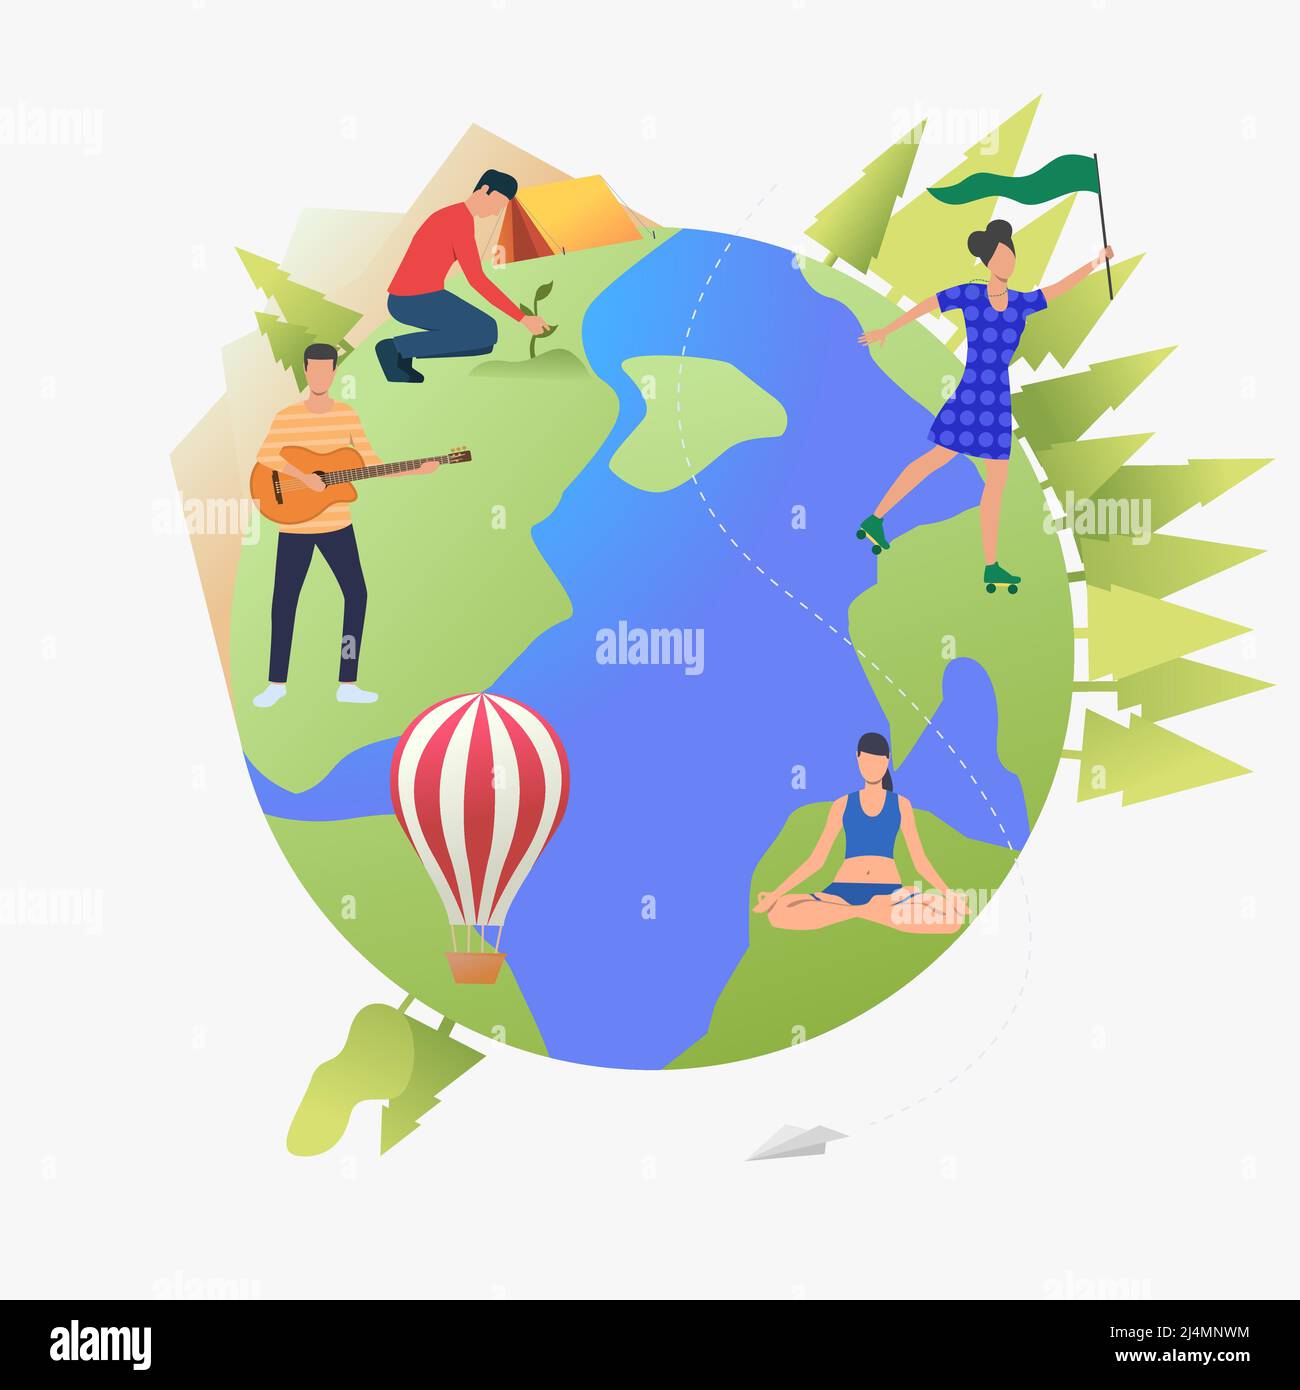 People roller skating, meditating and playing guitar on Earth globe. Lifestyle, leisure, activity, sport concept. Vector illustration can be used for Stock Vector